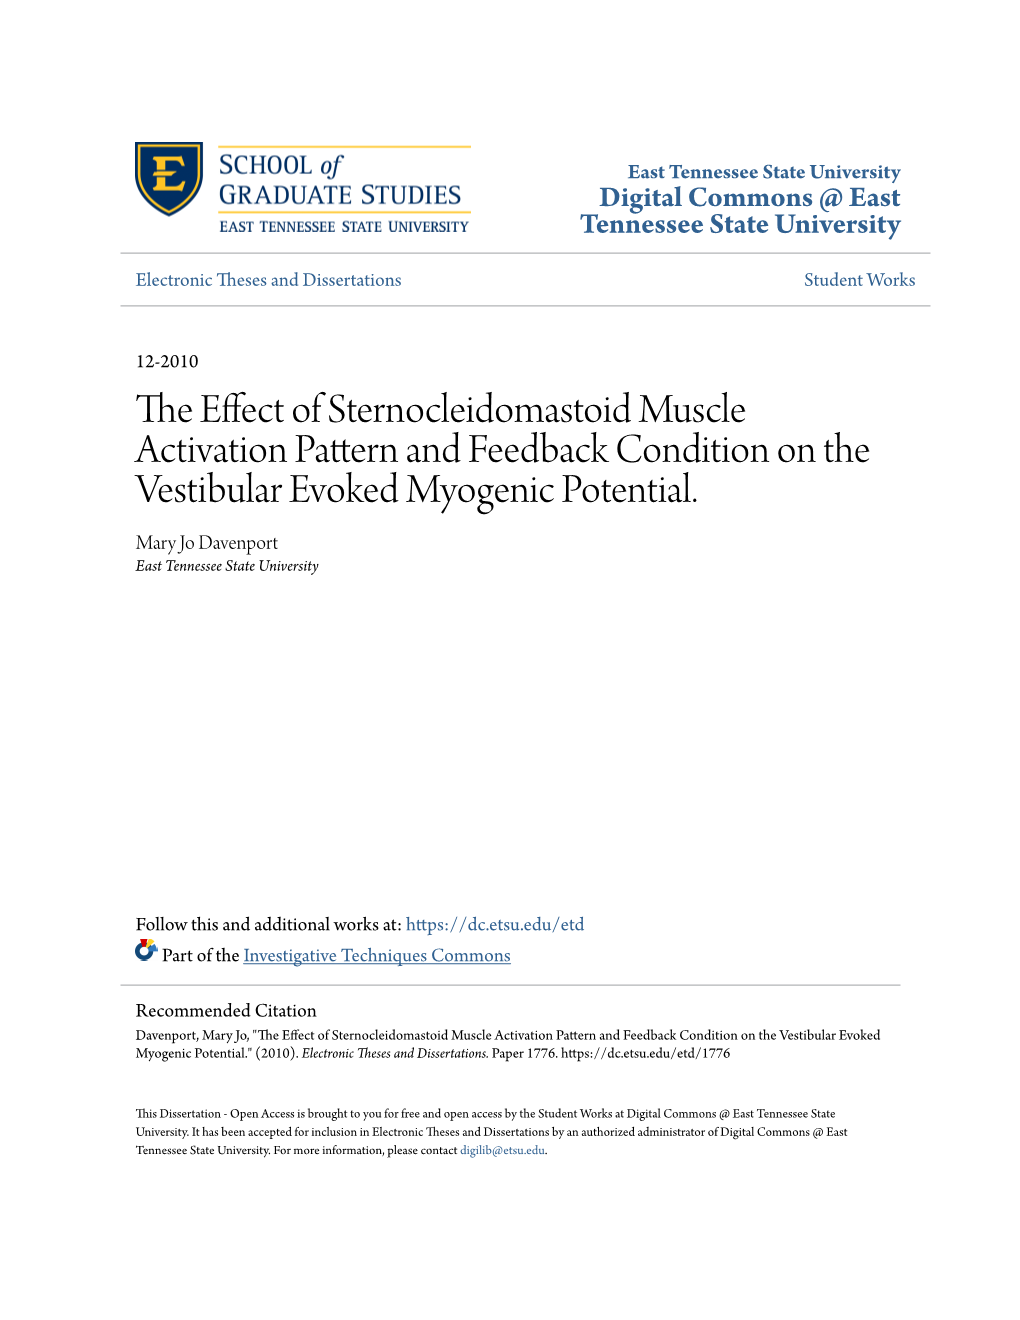 The Effect of Sternocleidomastoid Muscle Activation Pattern and Feedback Condition on the Vestibular Evoked Myogenic Potential." (2010)